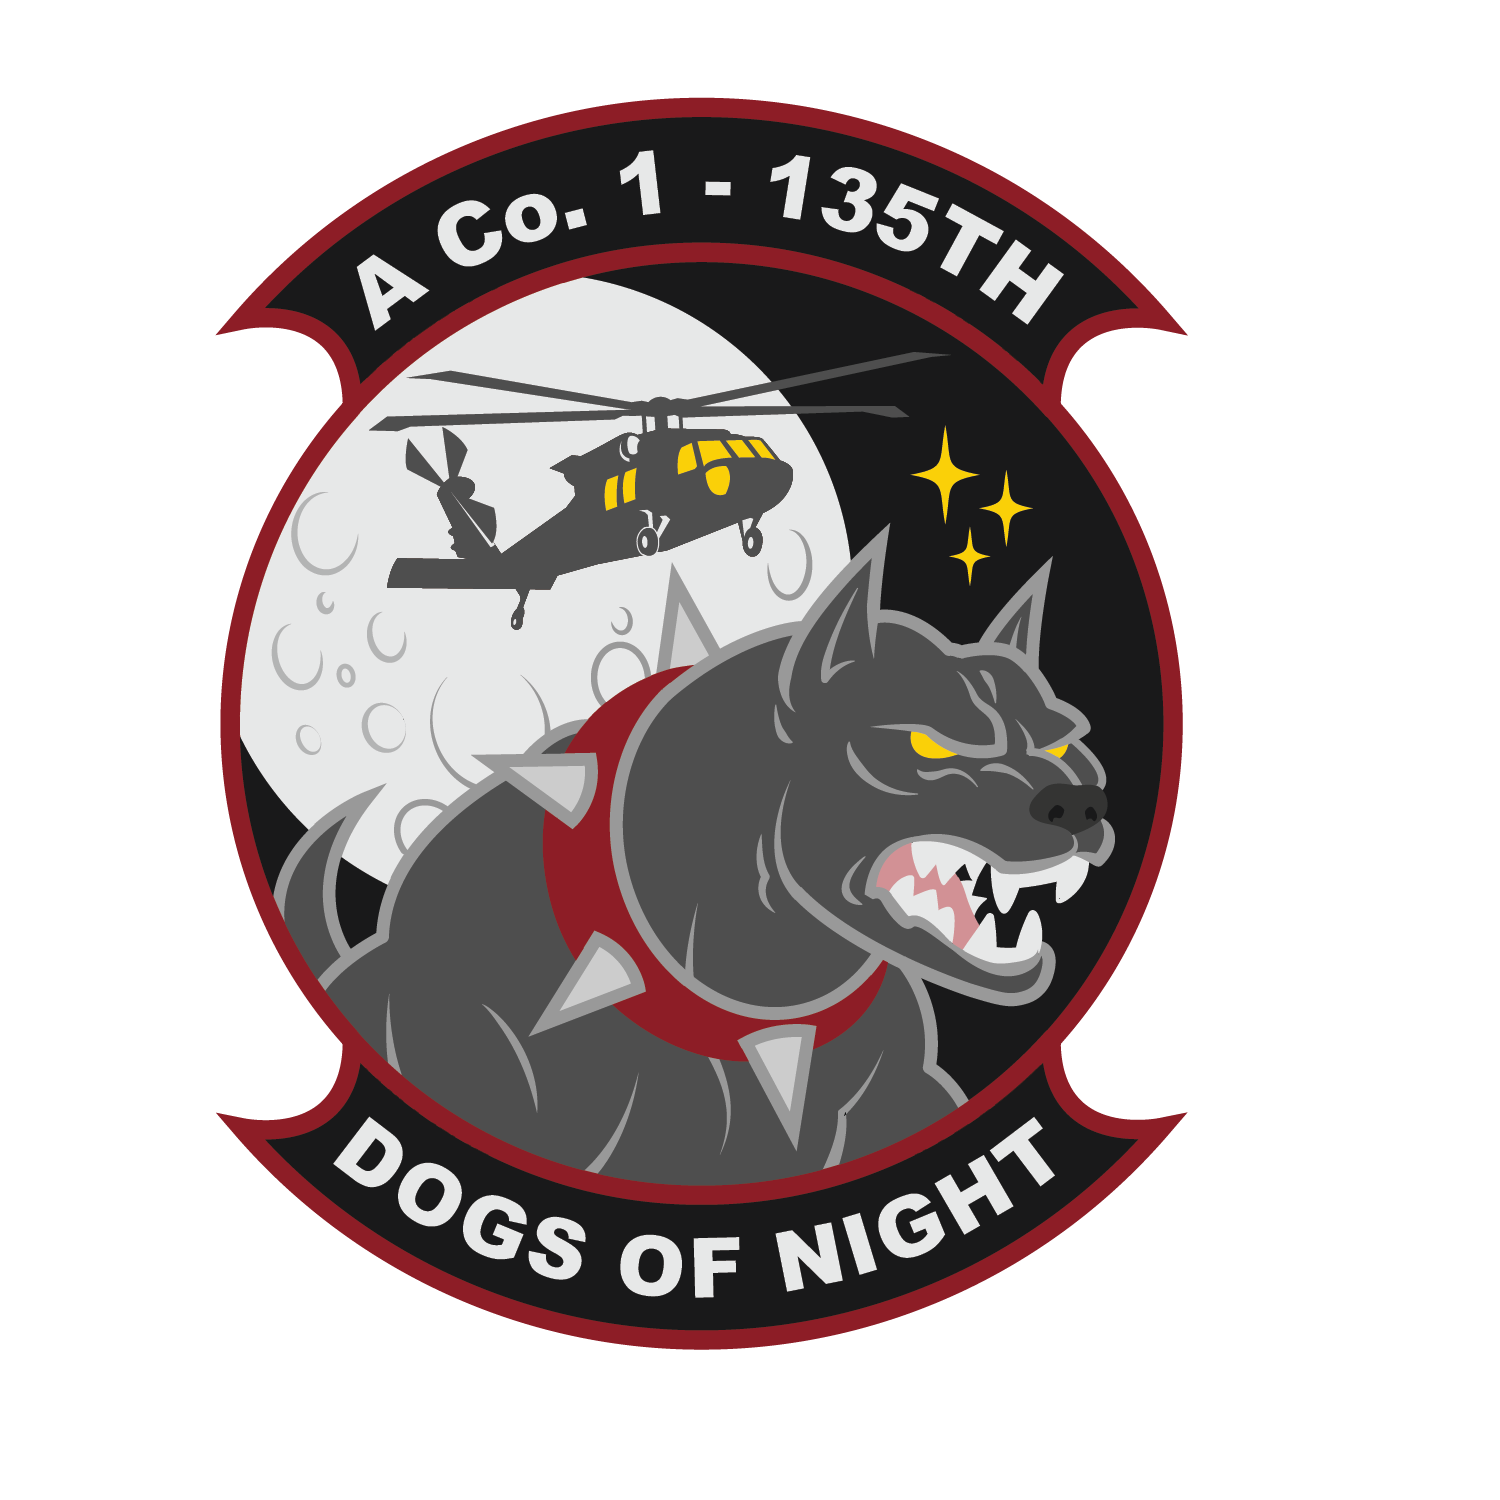 A Co, 1-135th AHB "Dogs of Night"